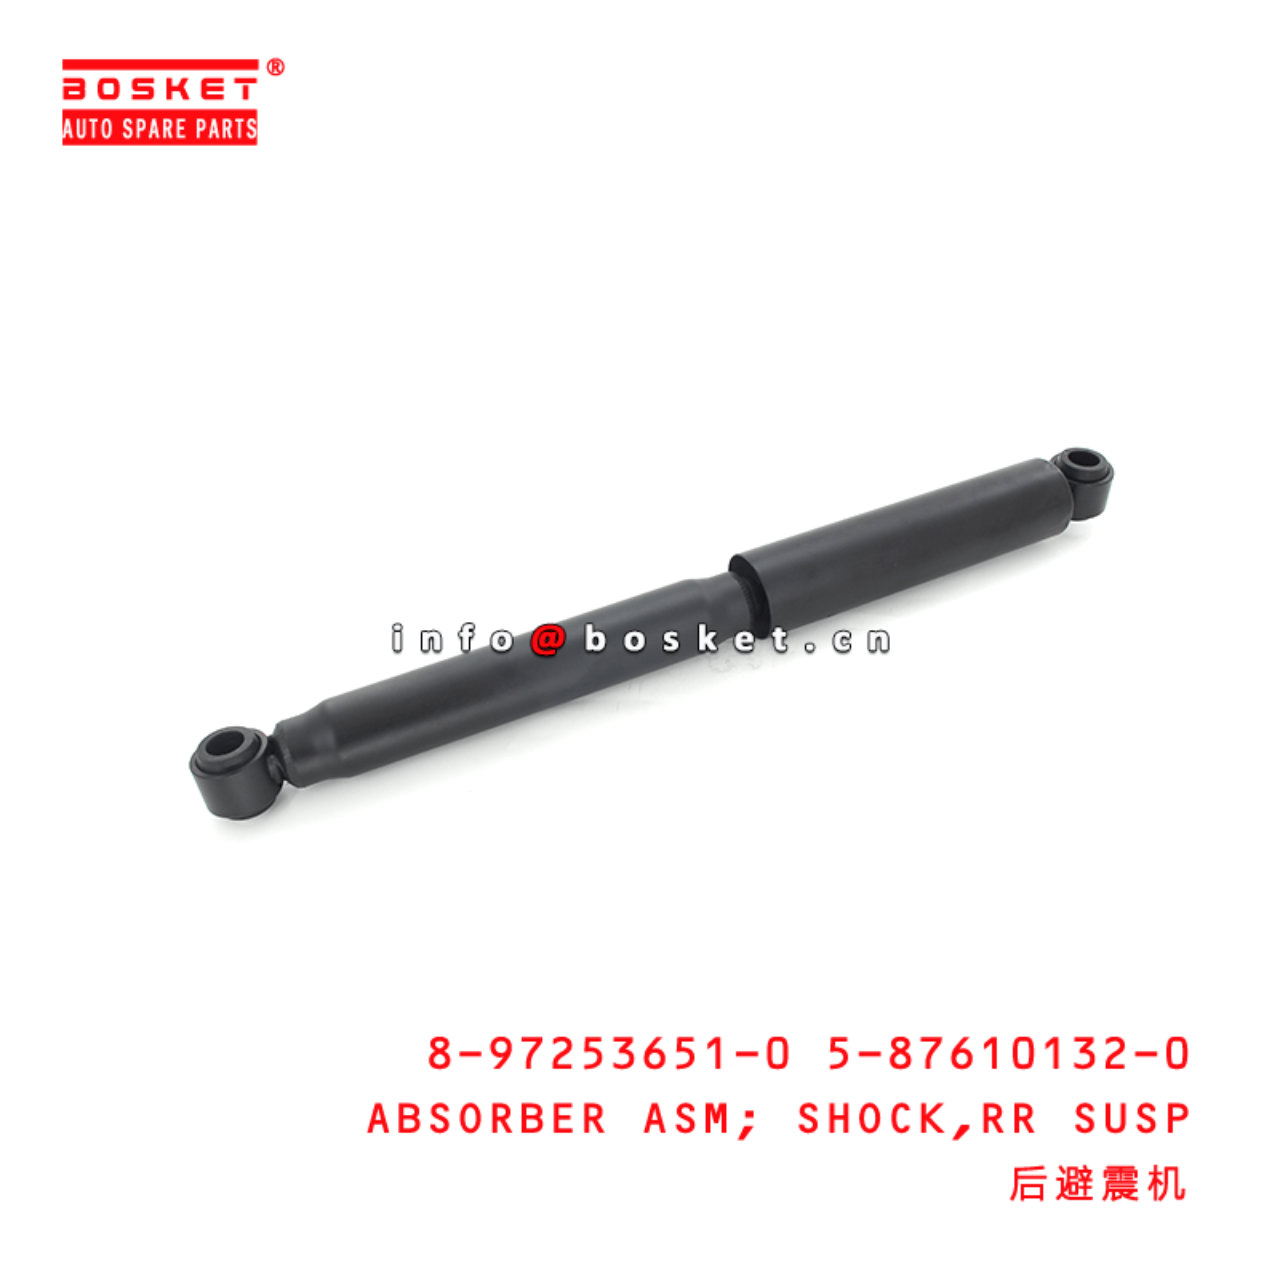 8-97253651-0 5-87610132-0 Suspension Rear Shock Absorber Assembly 8972536510 5876101320 Suitable for